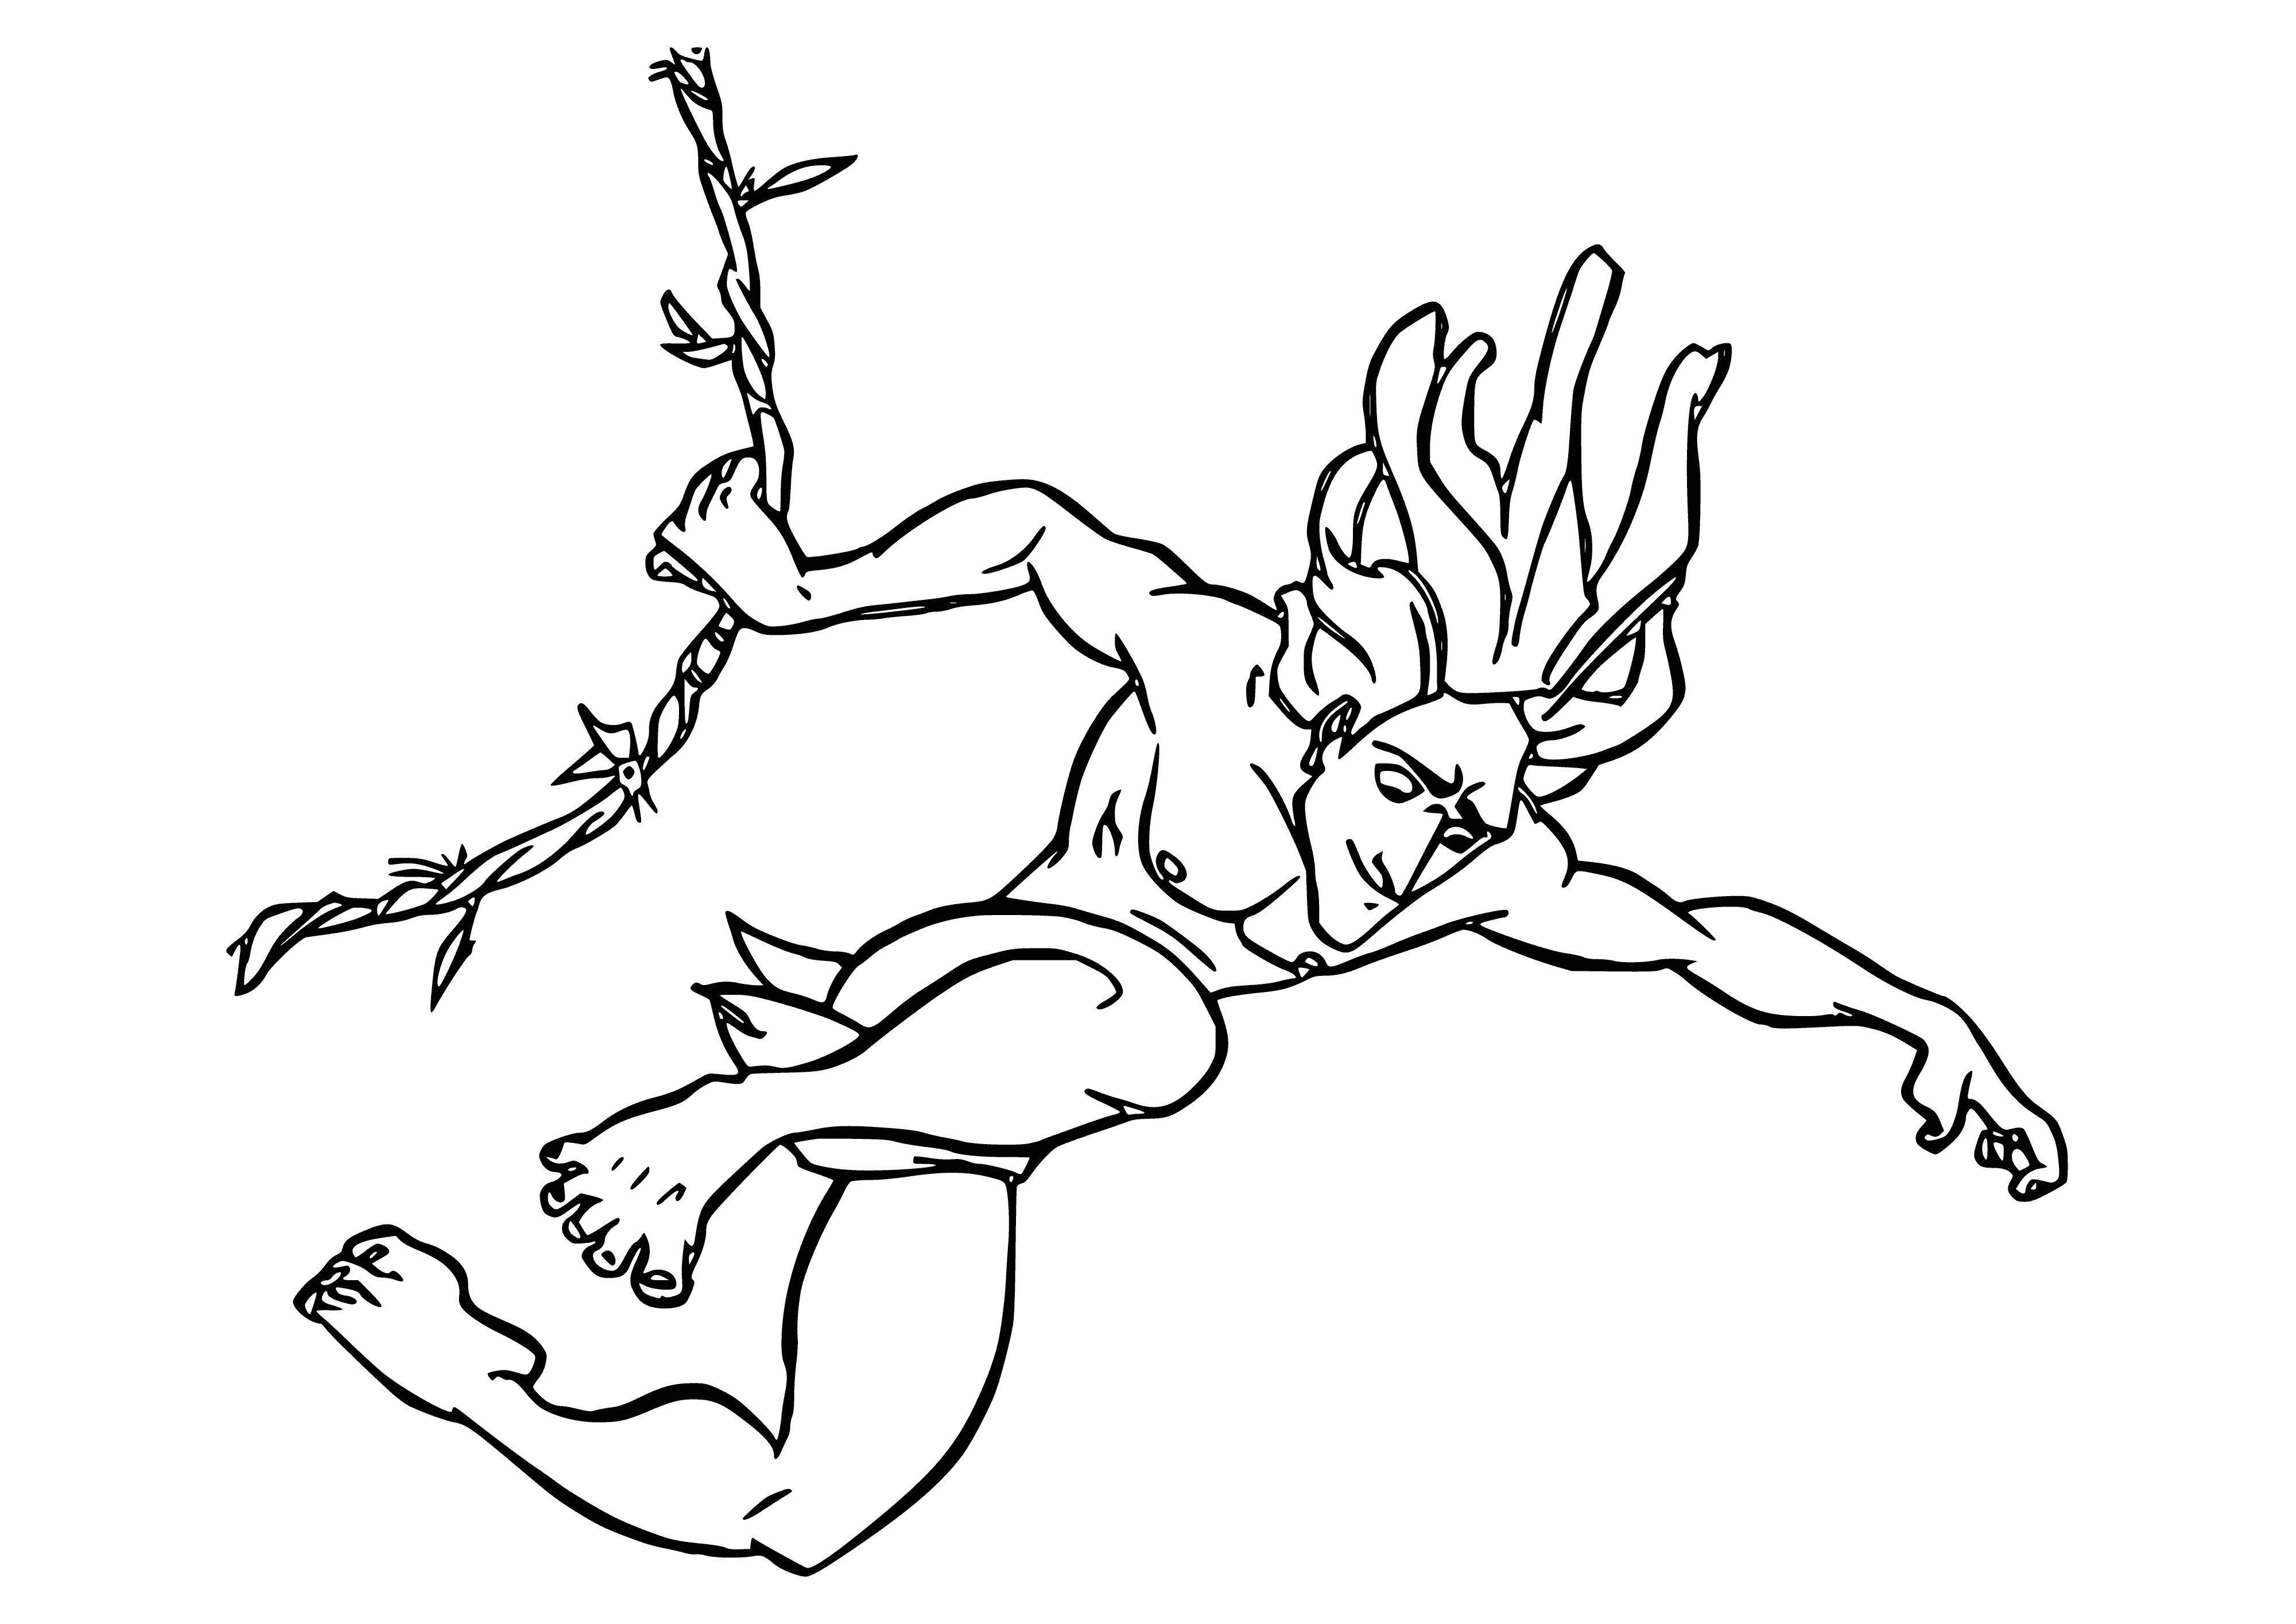 coloring page: A man of African descent swings on vines in a jungle, wearing a loincloth and with a knife at his waist. His long dark hair flows behind him as he grabs onto another vine mid-air.